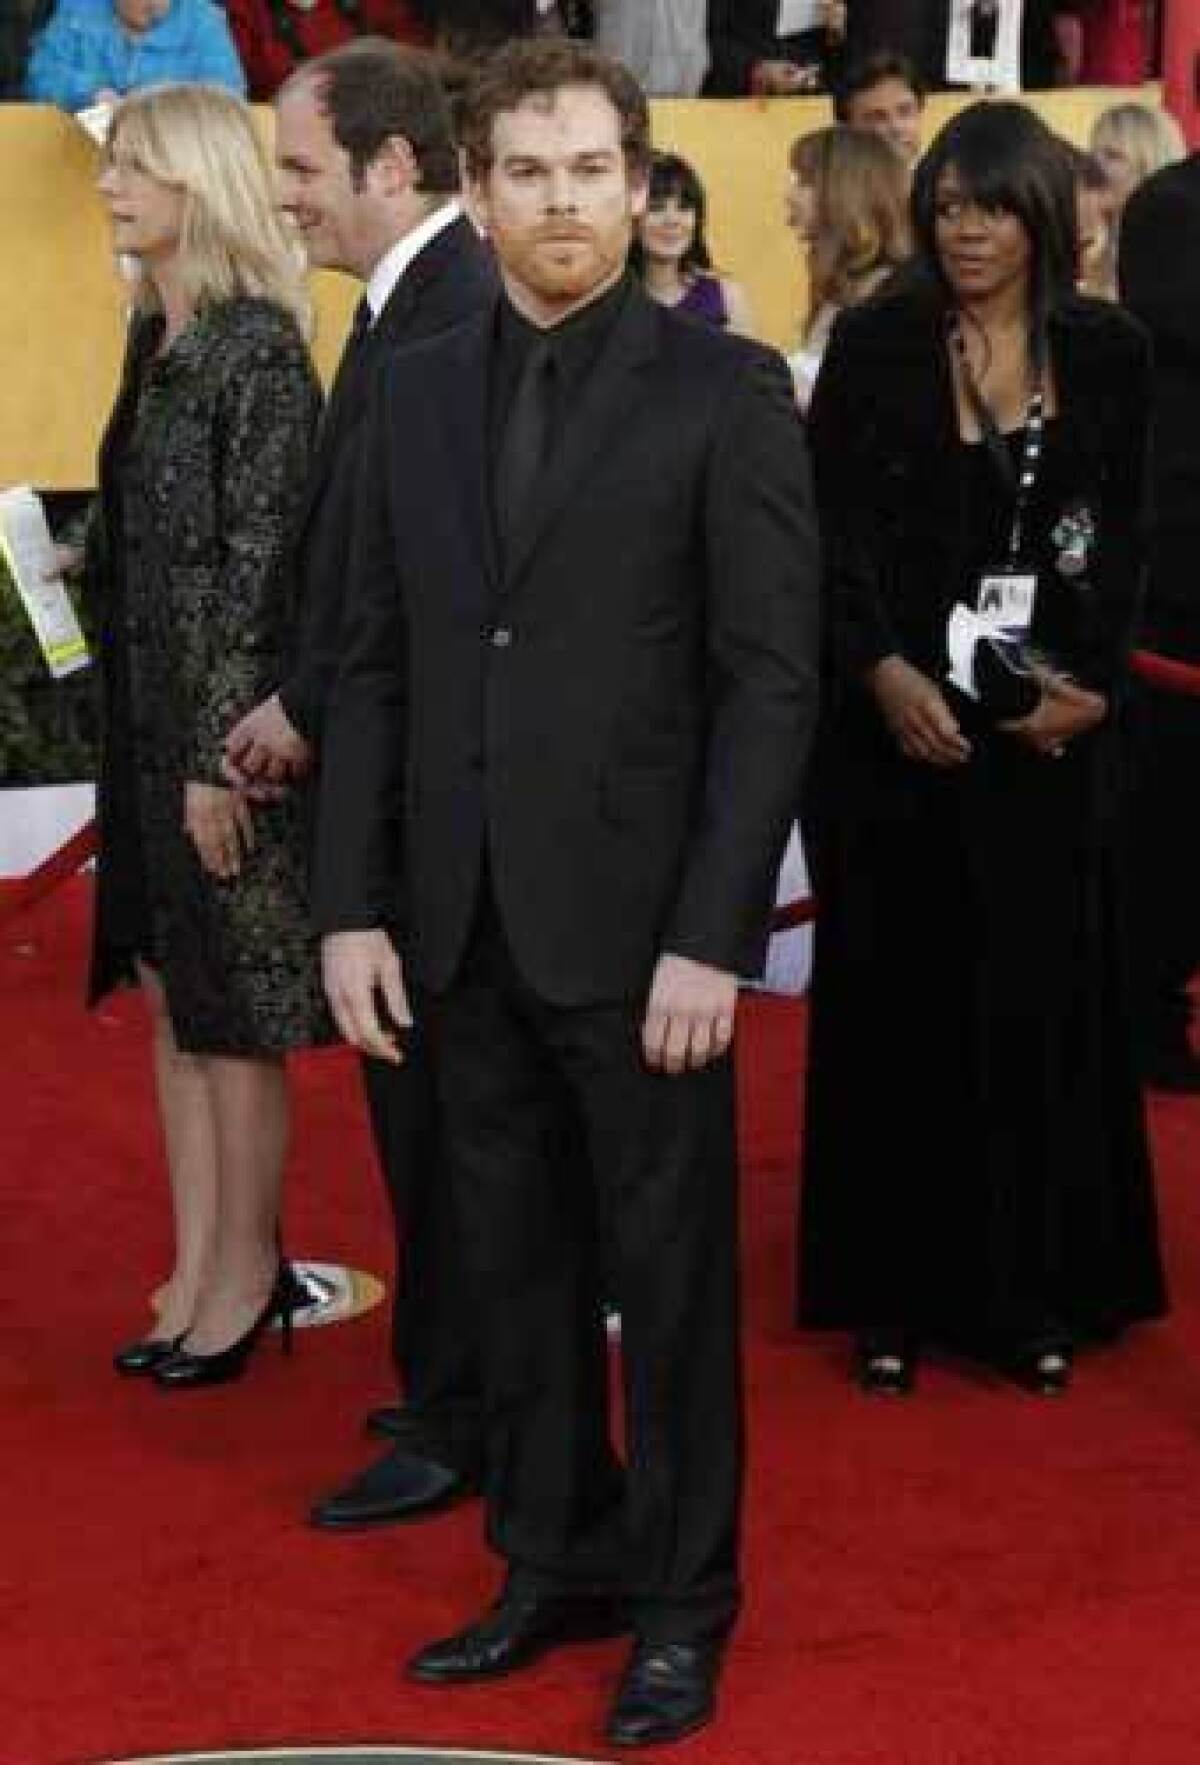 Michael C. Hall walks the red carpet at the 17th annual Screen Actors Guild Awards at the Shrine Auditorium in Los Angeles on Jan. 30, 2011.